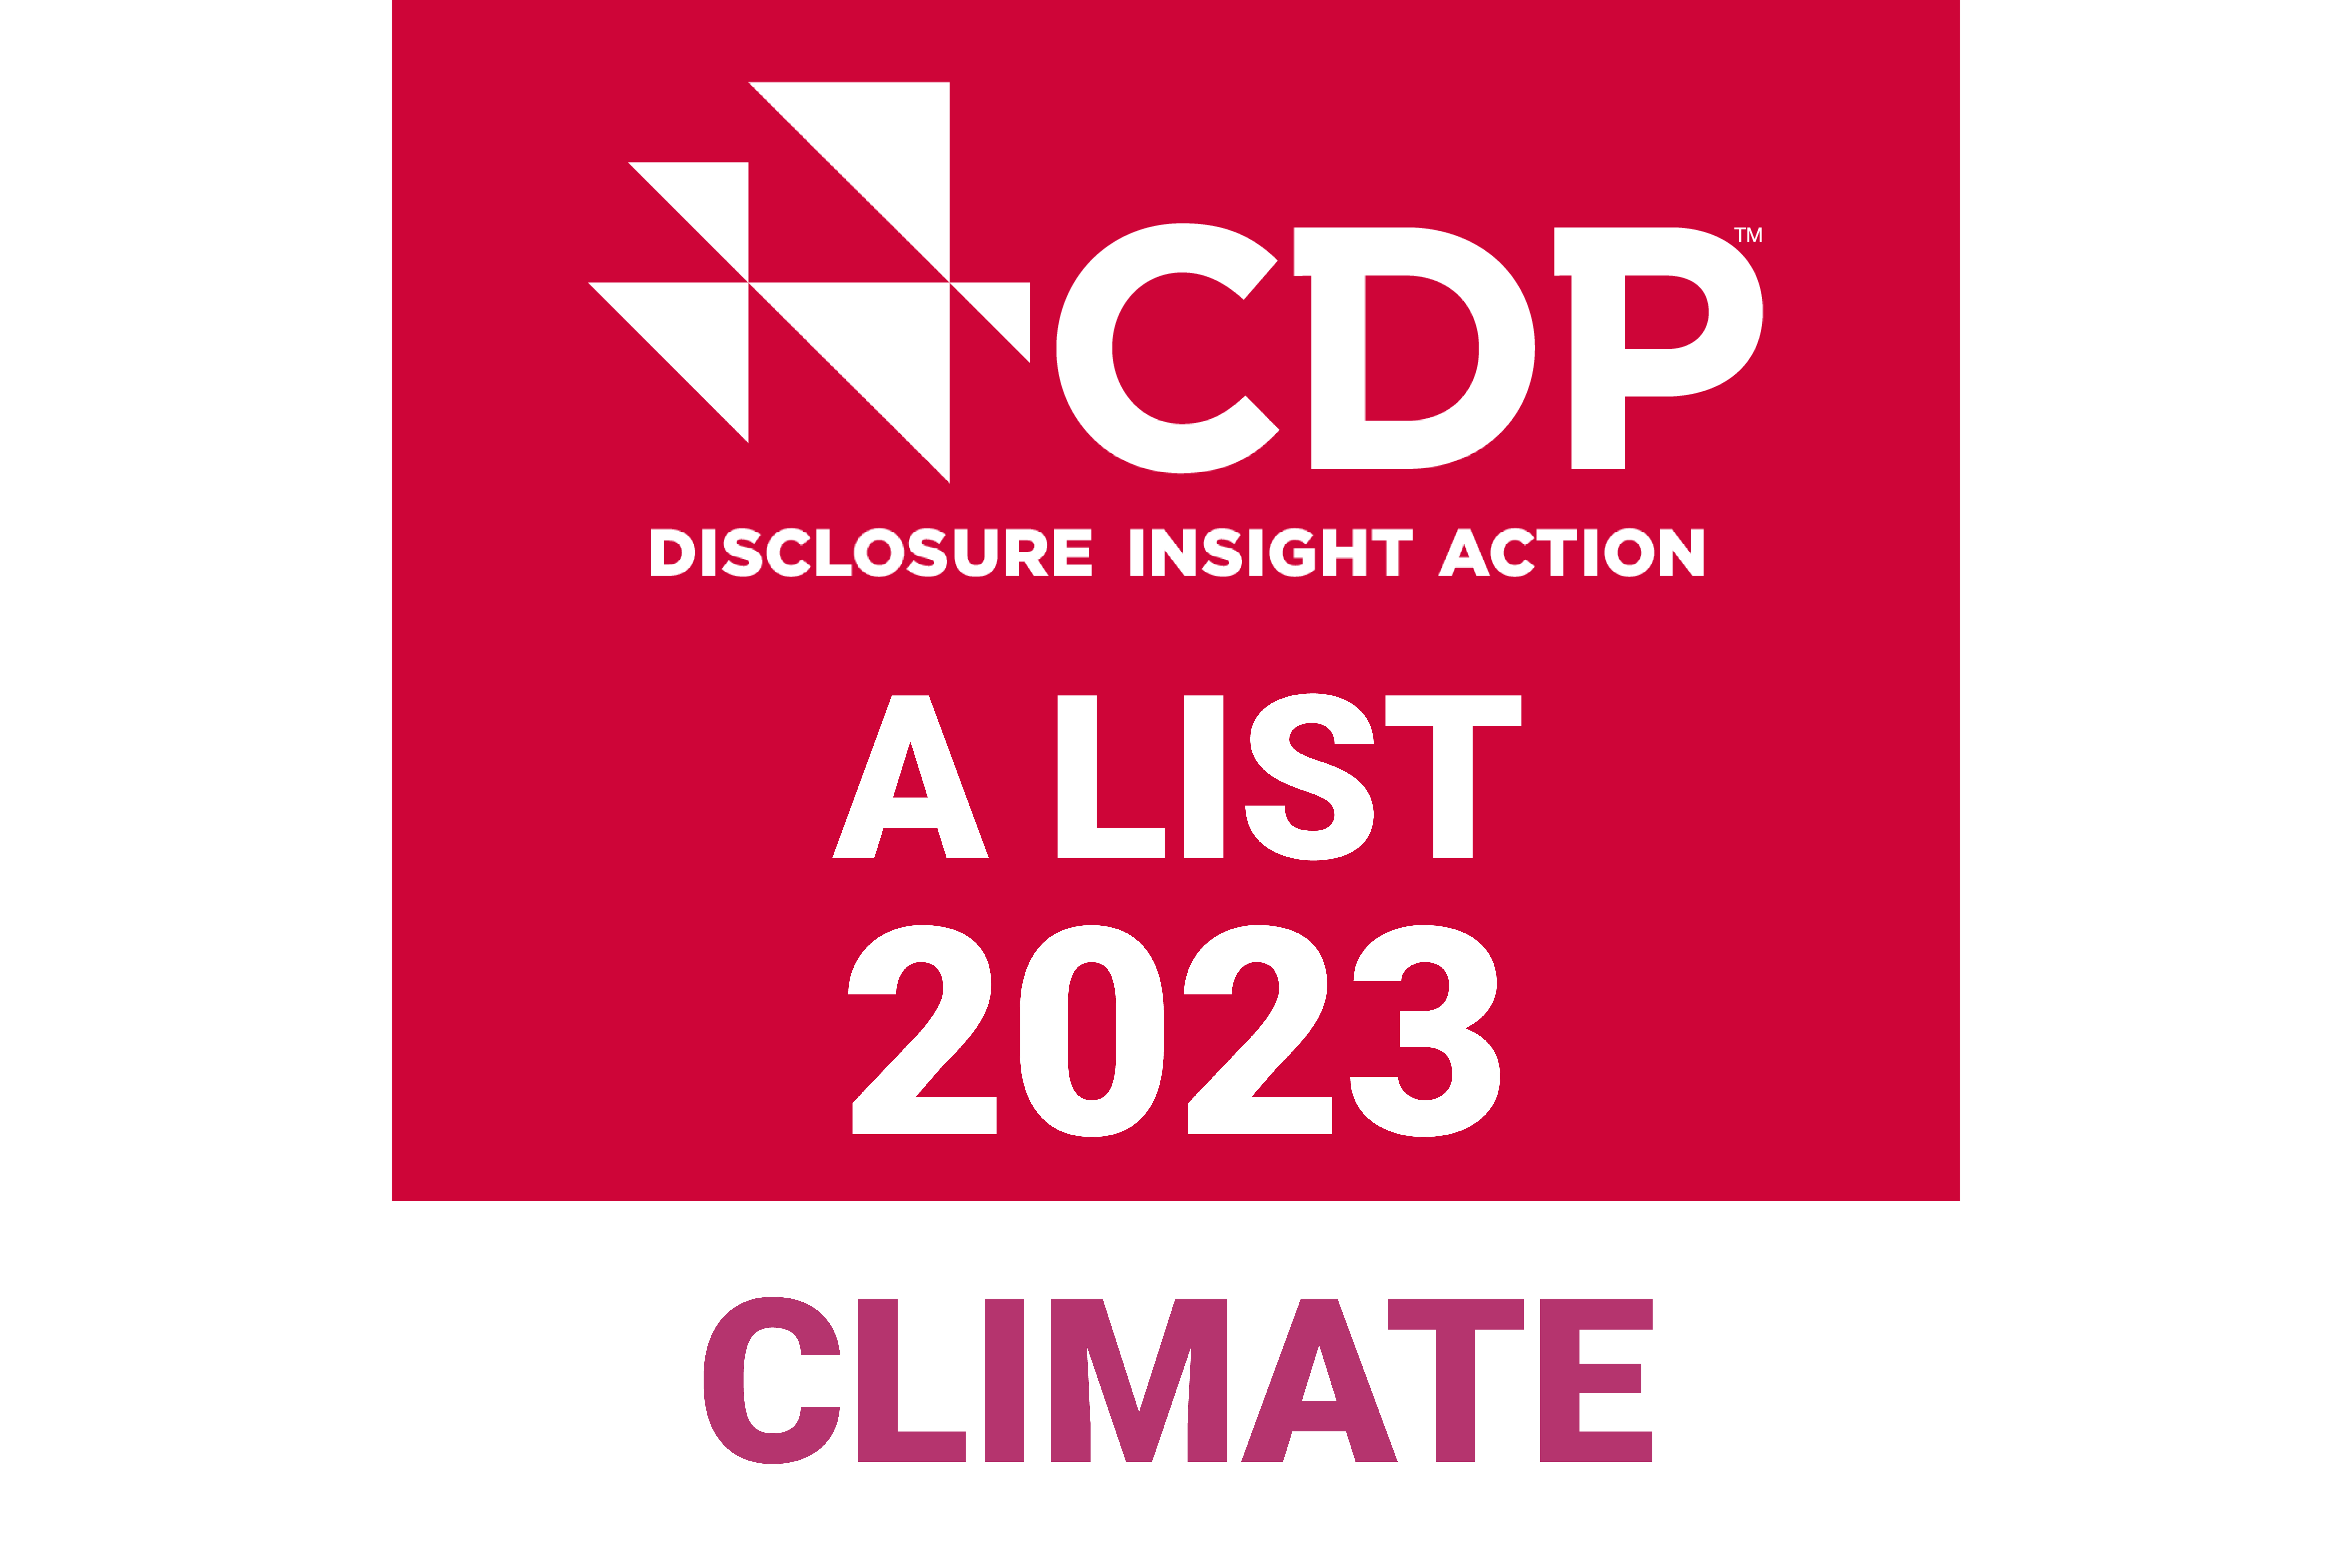 Red square with the text "CDP disclosure insight action A List 2023 Climate"